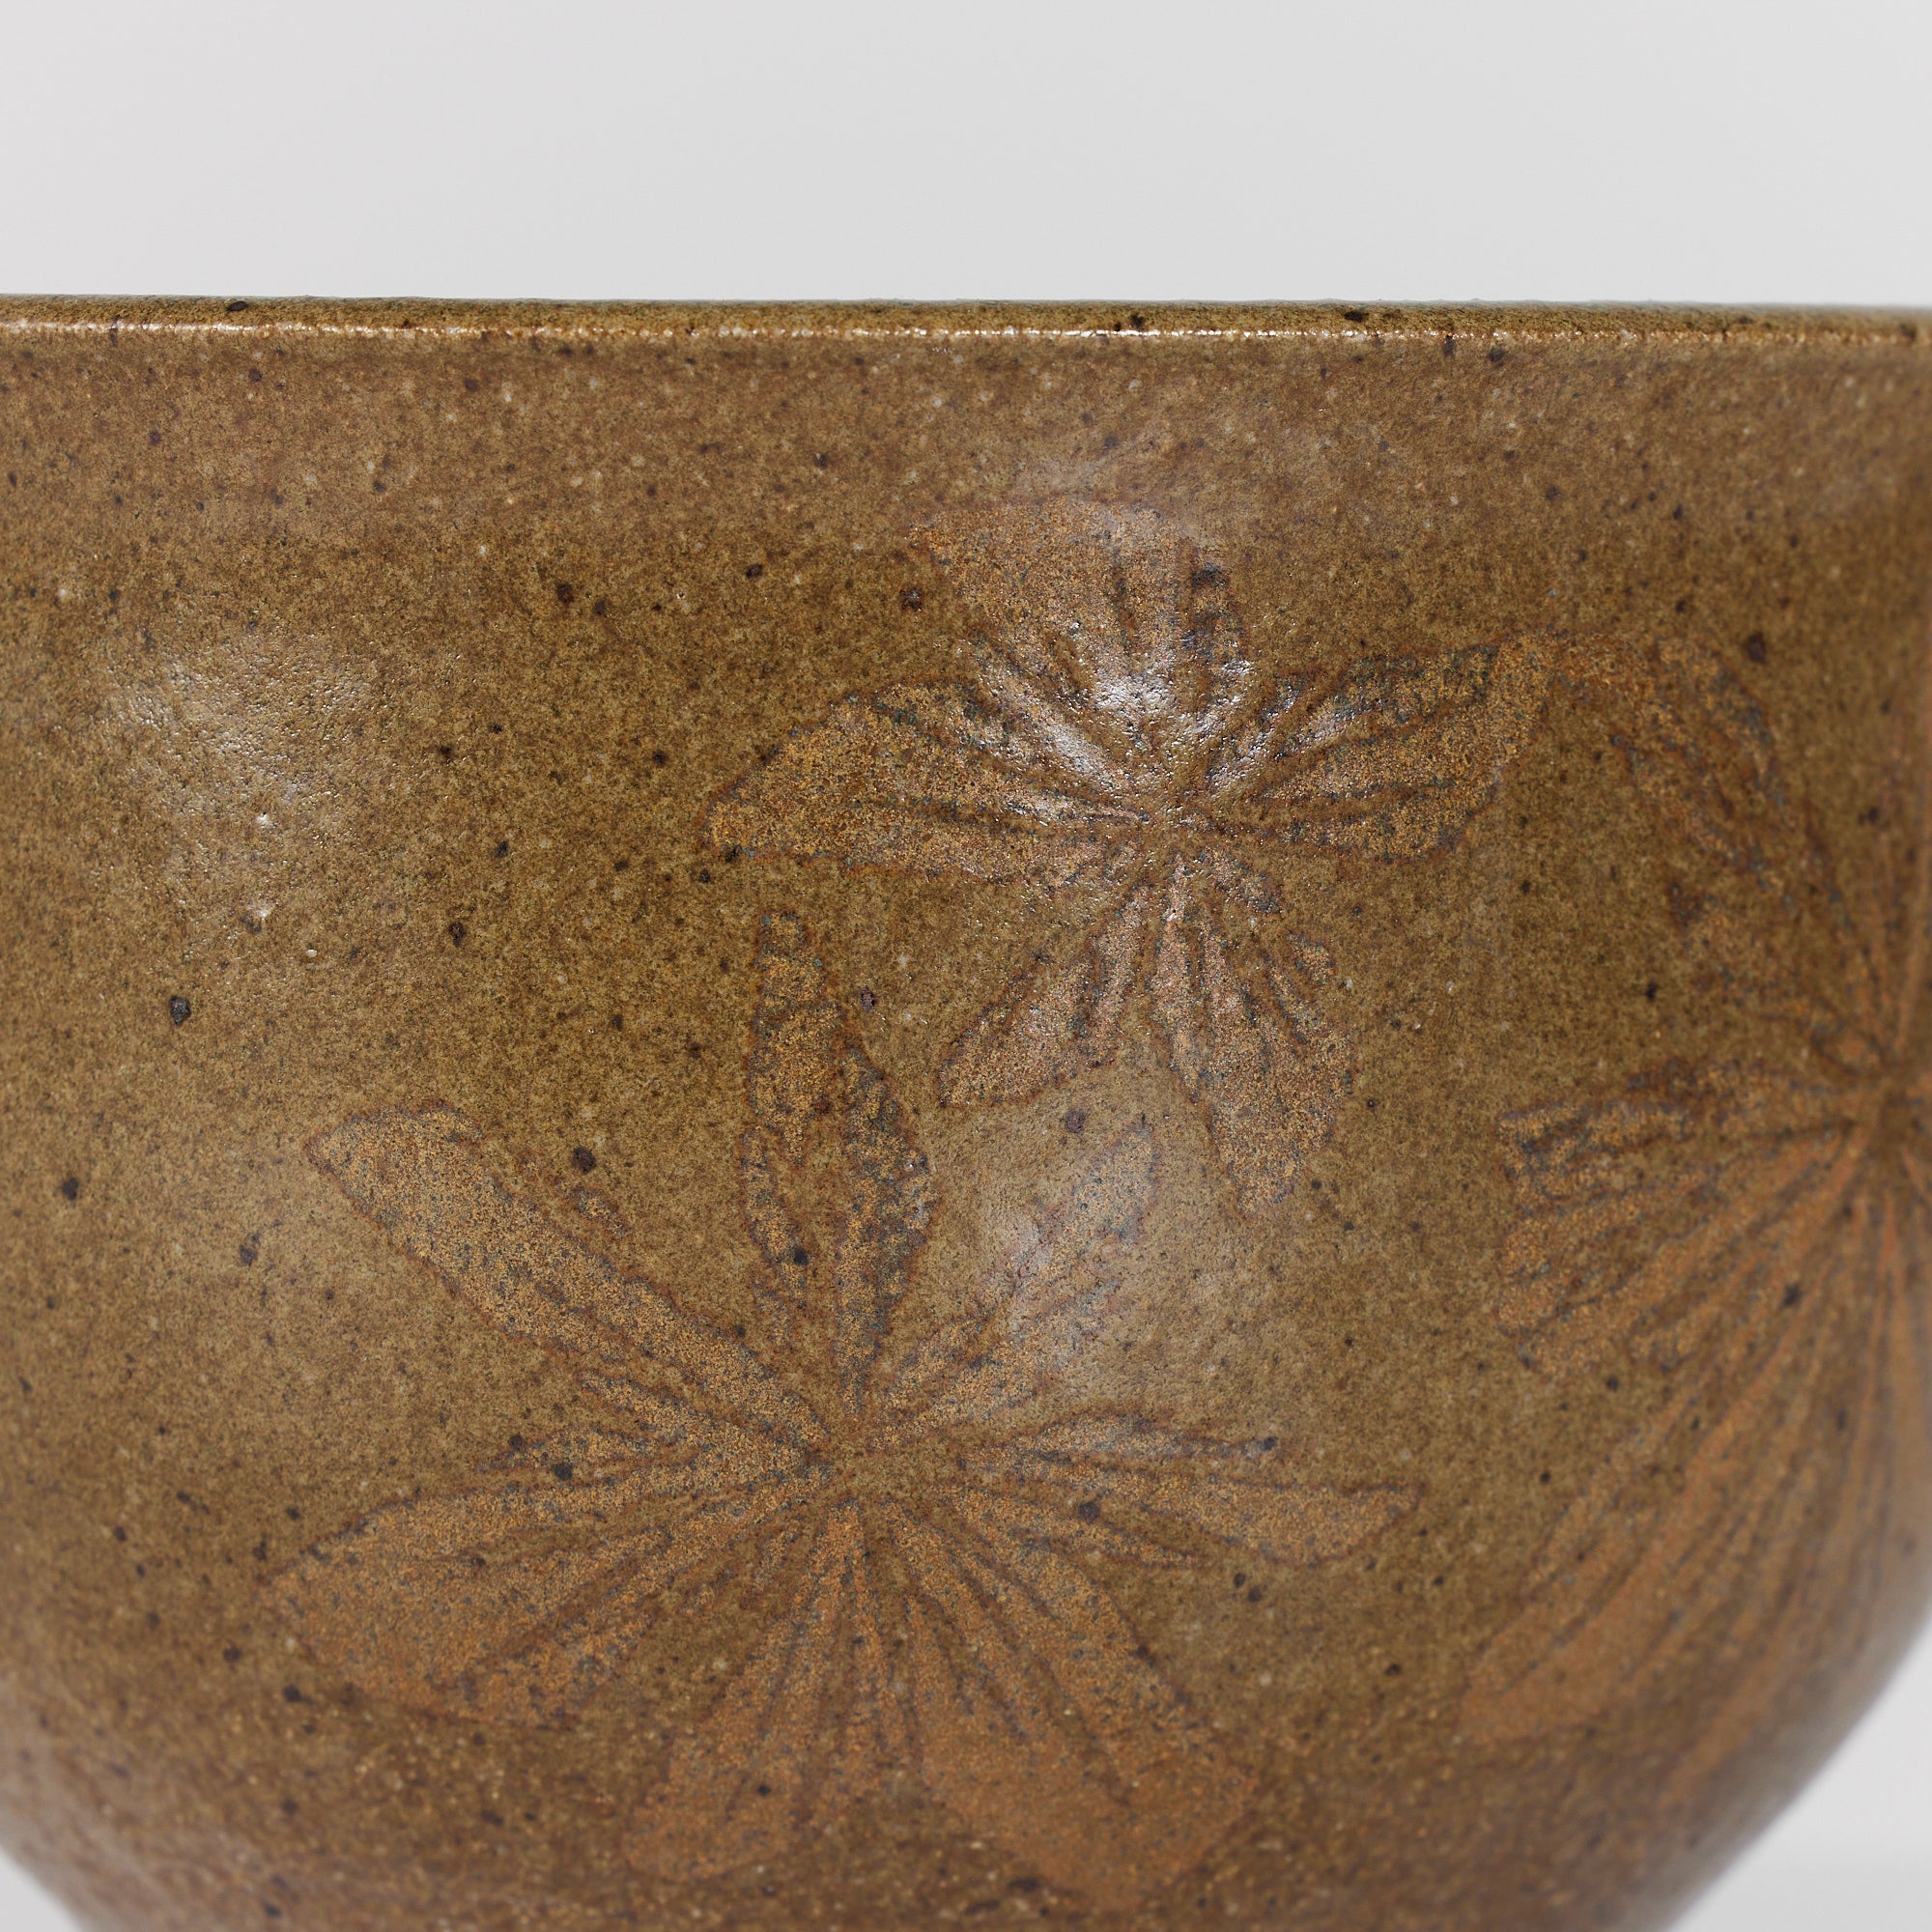 Robert Maxwell Glazed Studio Pottery Planter with Floral Motif